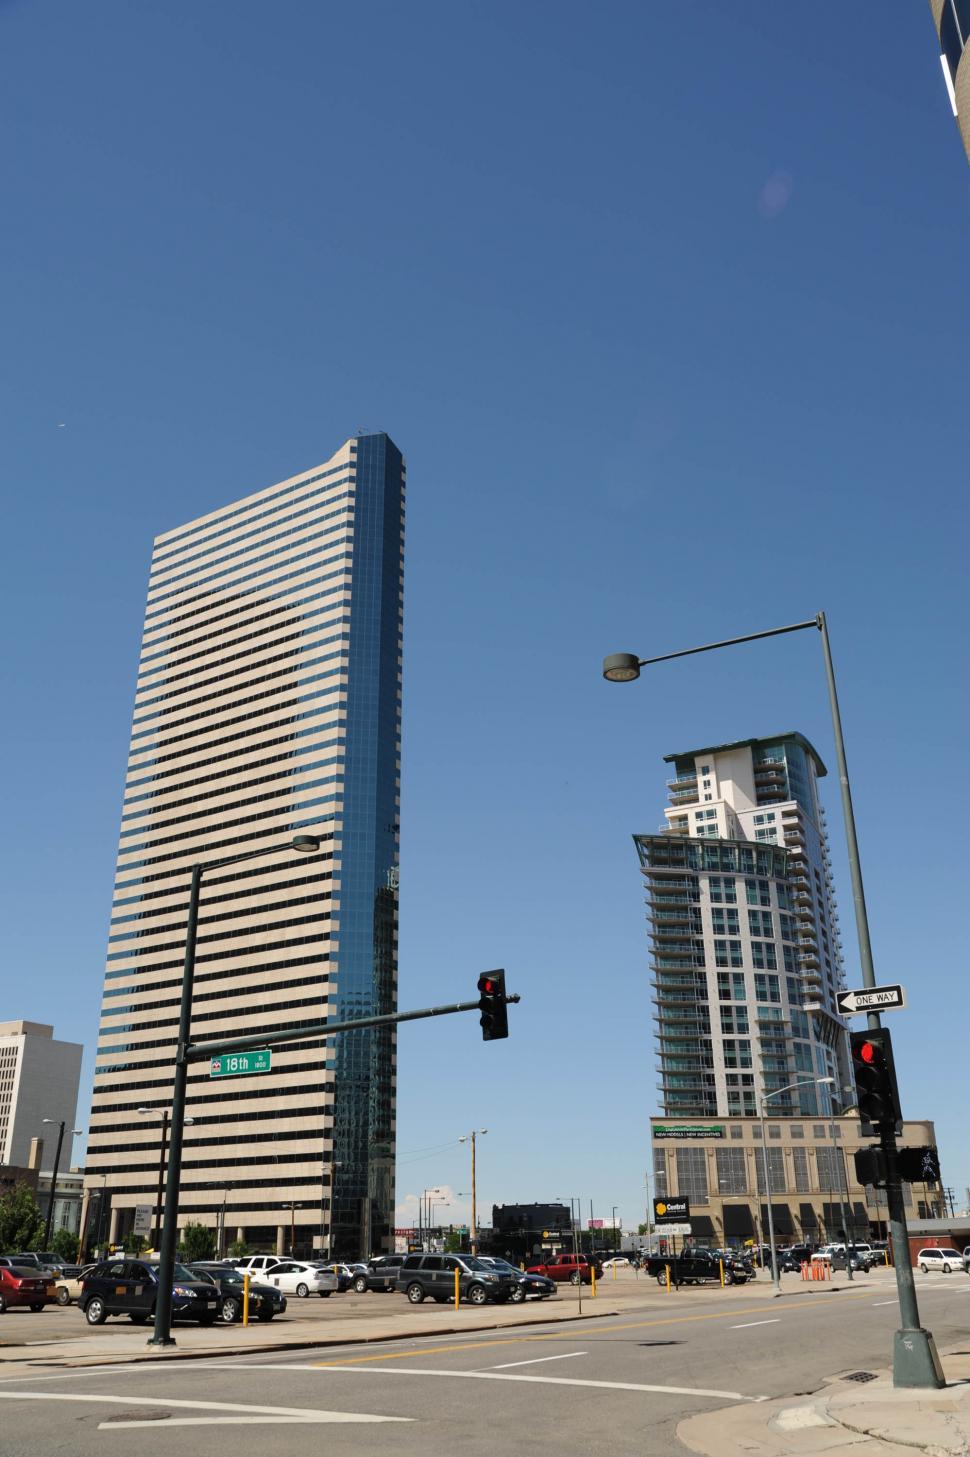 Free Image of City buildings 